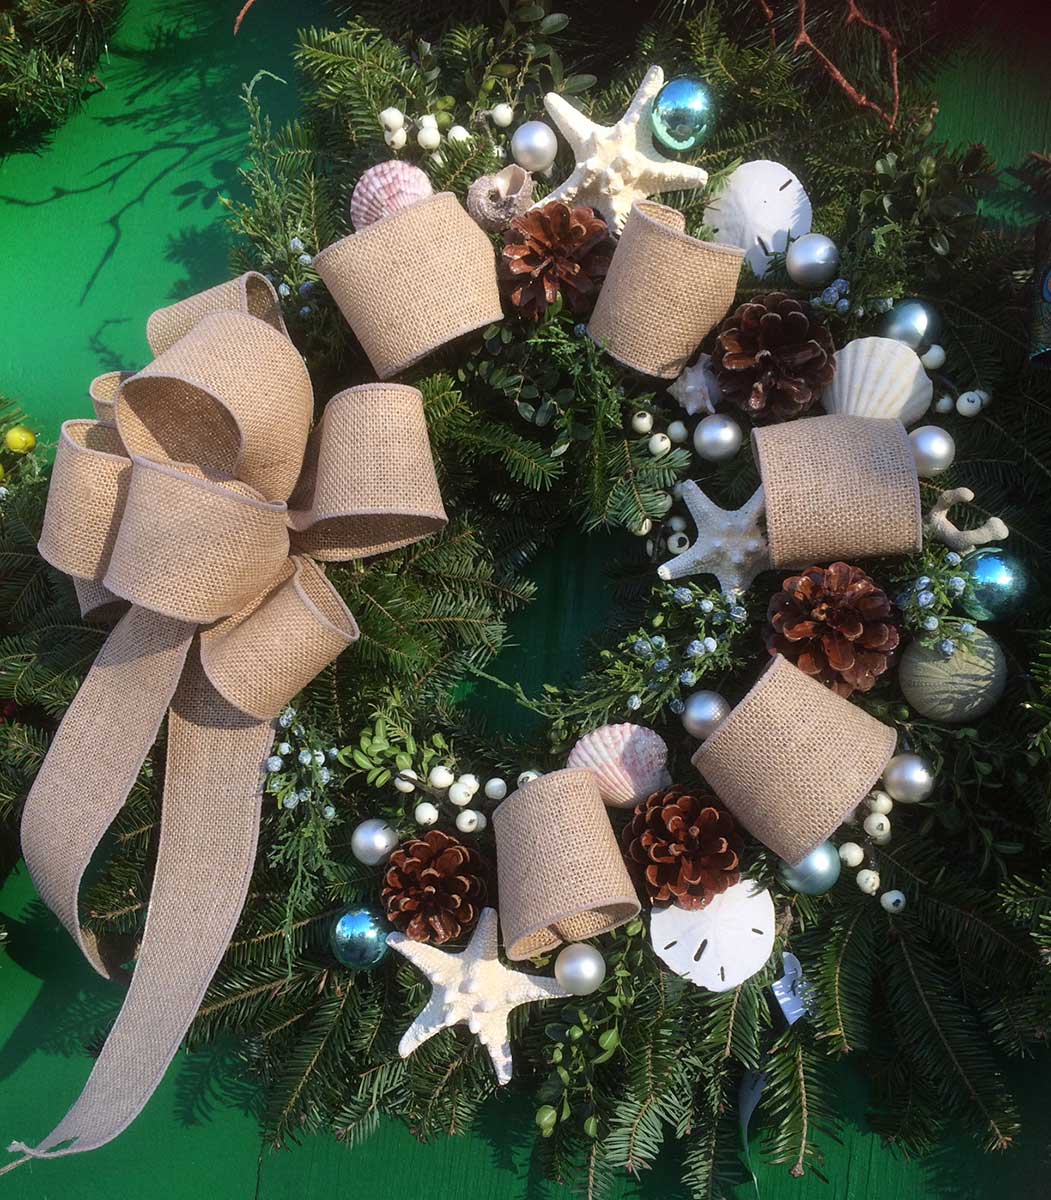 Christmas Season Holiday Wreaths for do-it-yourselfers available at Goffle Brook Farms